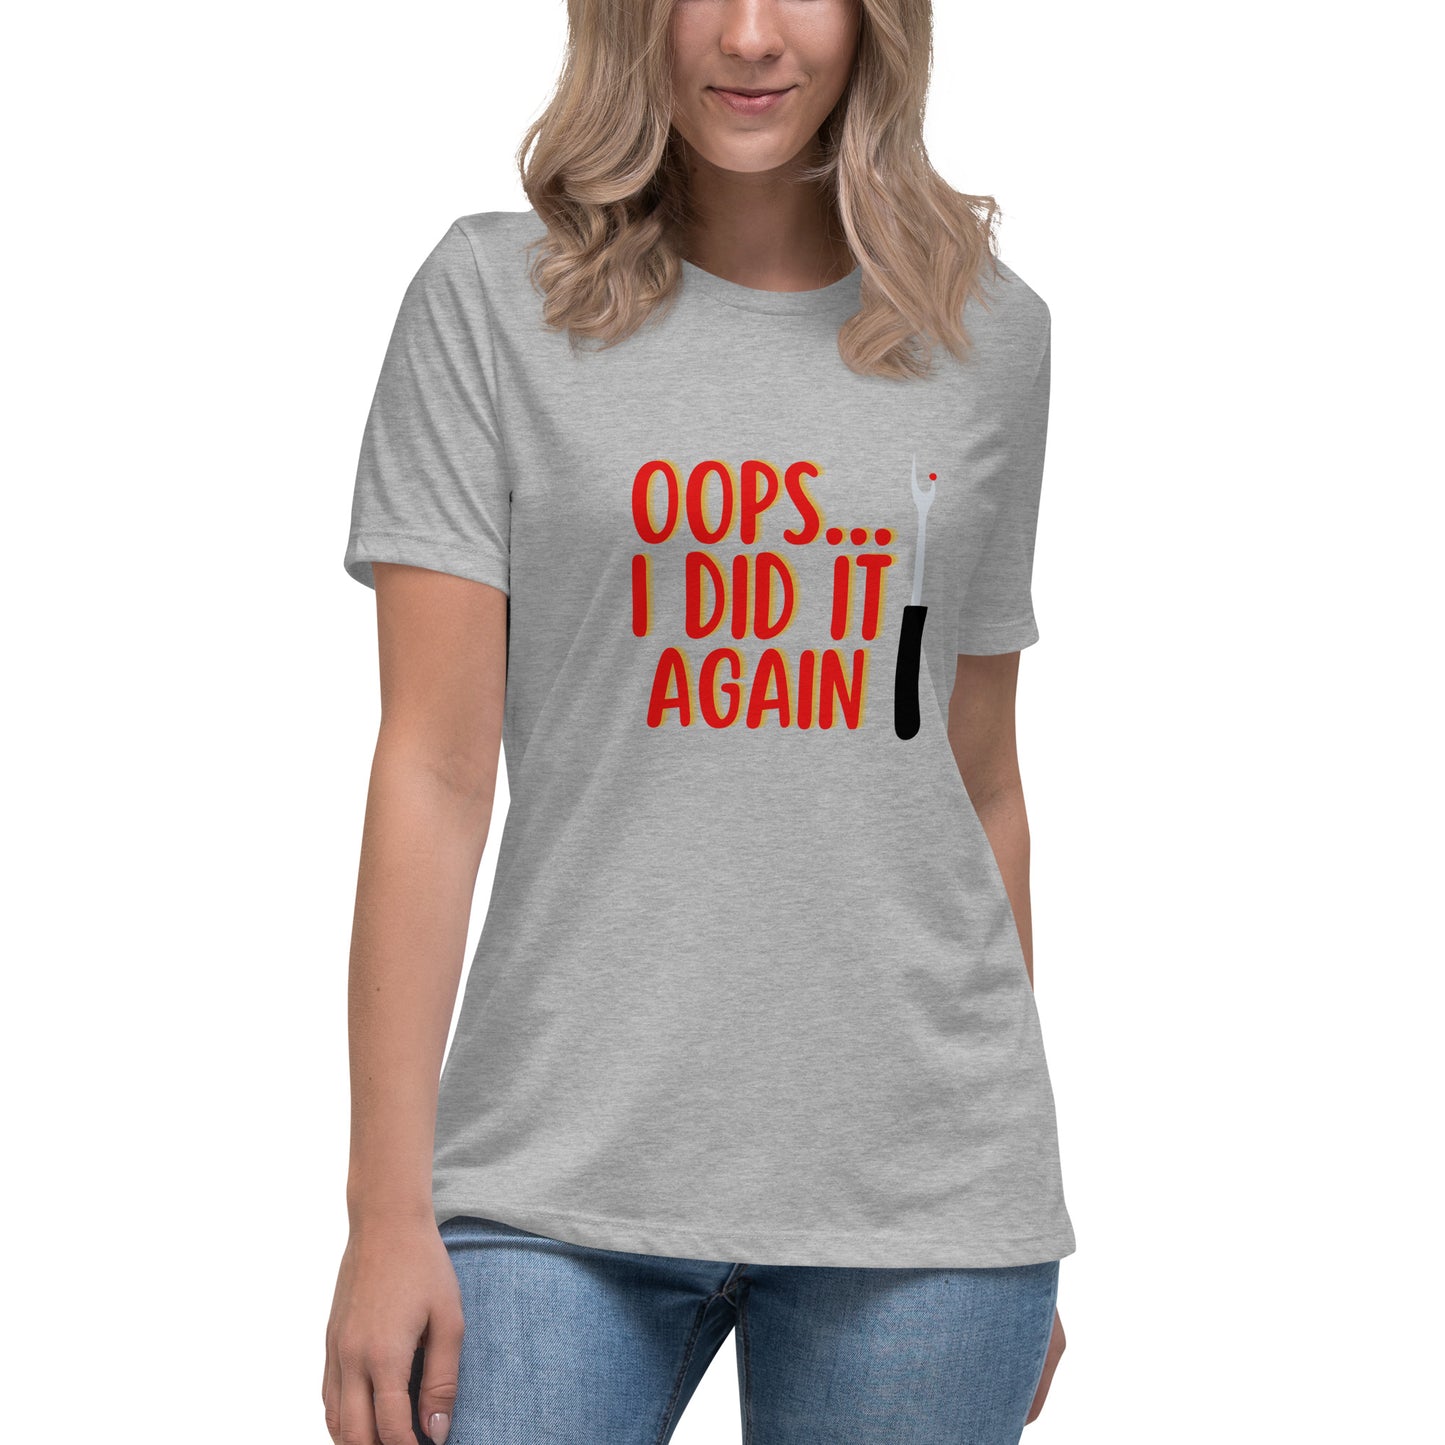 Oops! Women's Relaxed T-Shirt